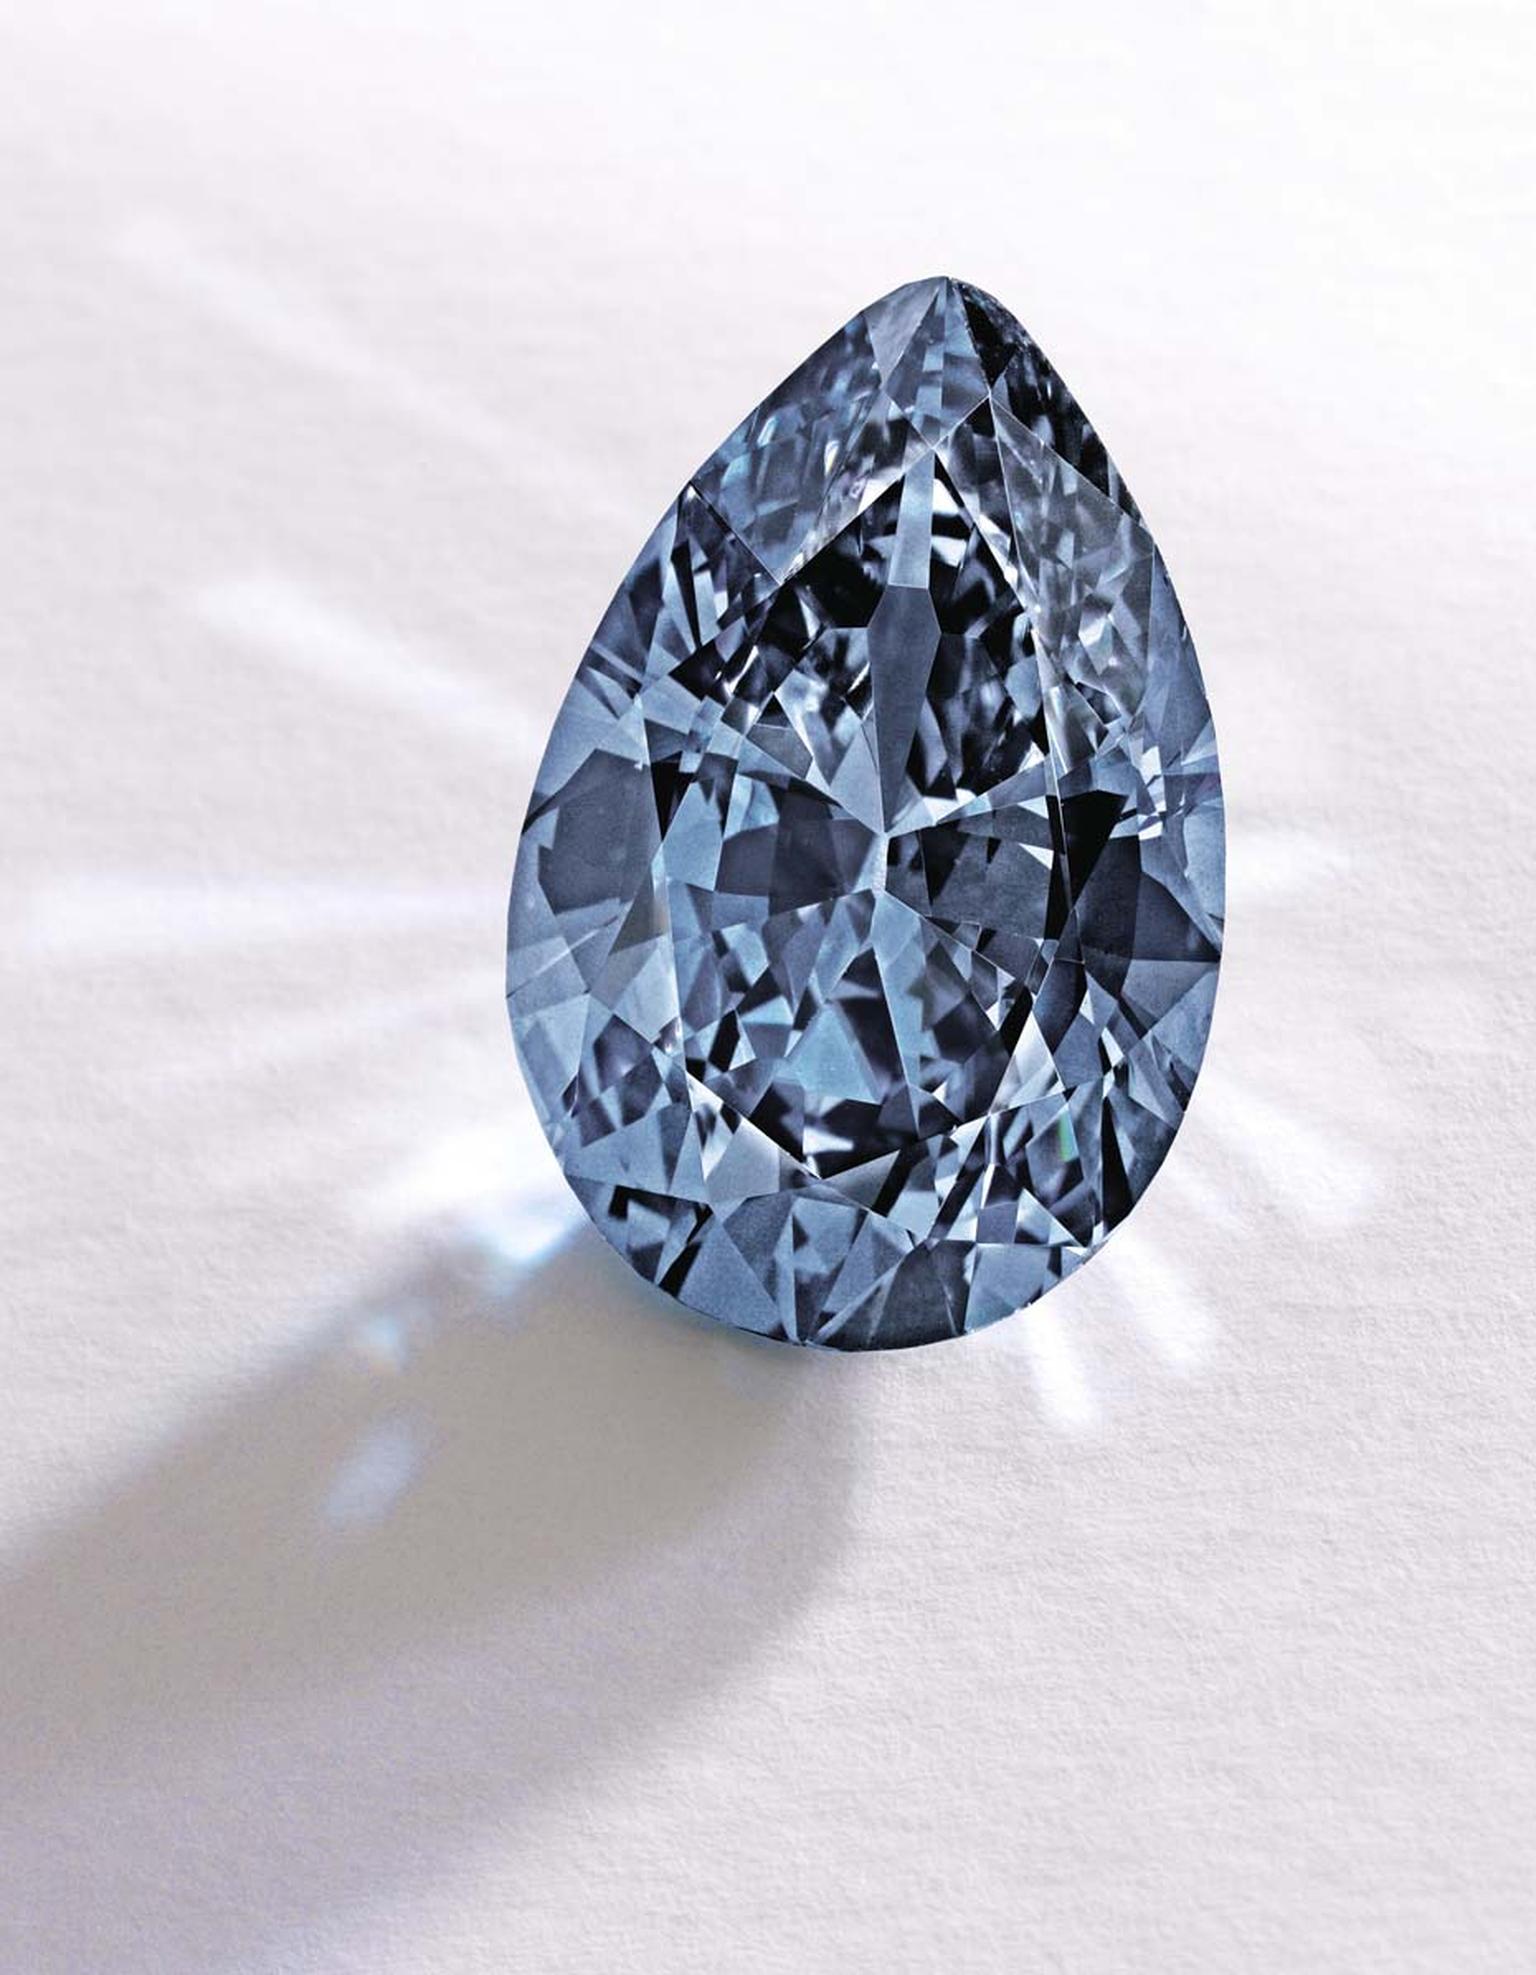 The rare 9.74ct Fancy Vivid Blue diamond is potentially internally flawless (IF) and VVS2 clarity (estimate: $10-15 million).